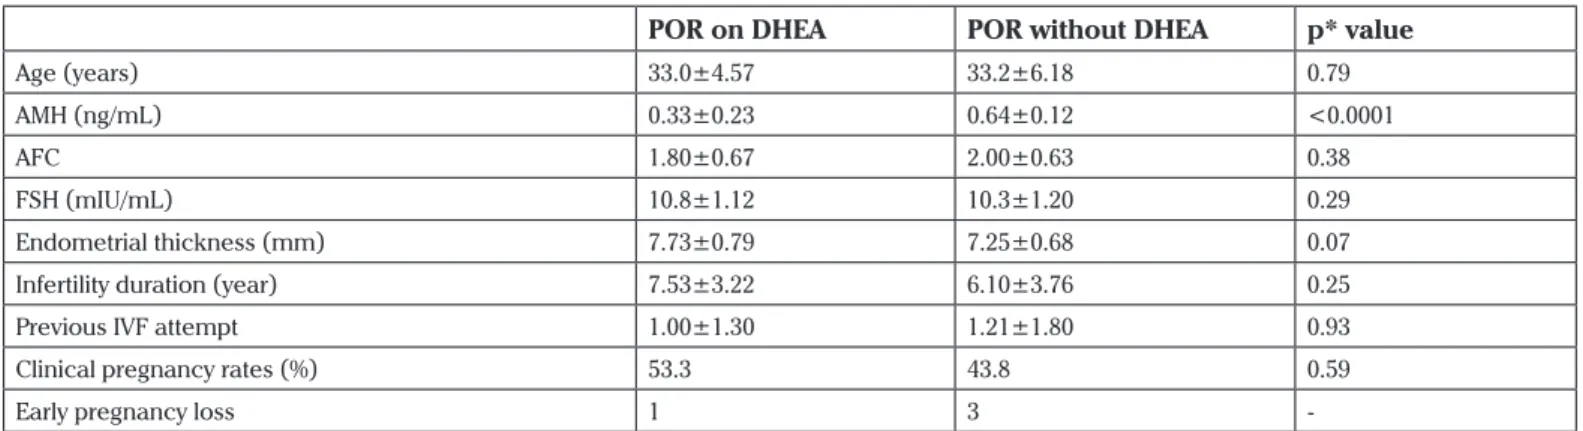 Table 1. Clinical characteristics of POR women on DHEA and without DHEA